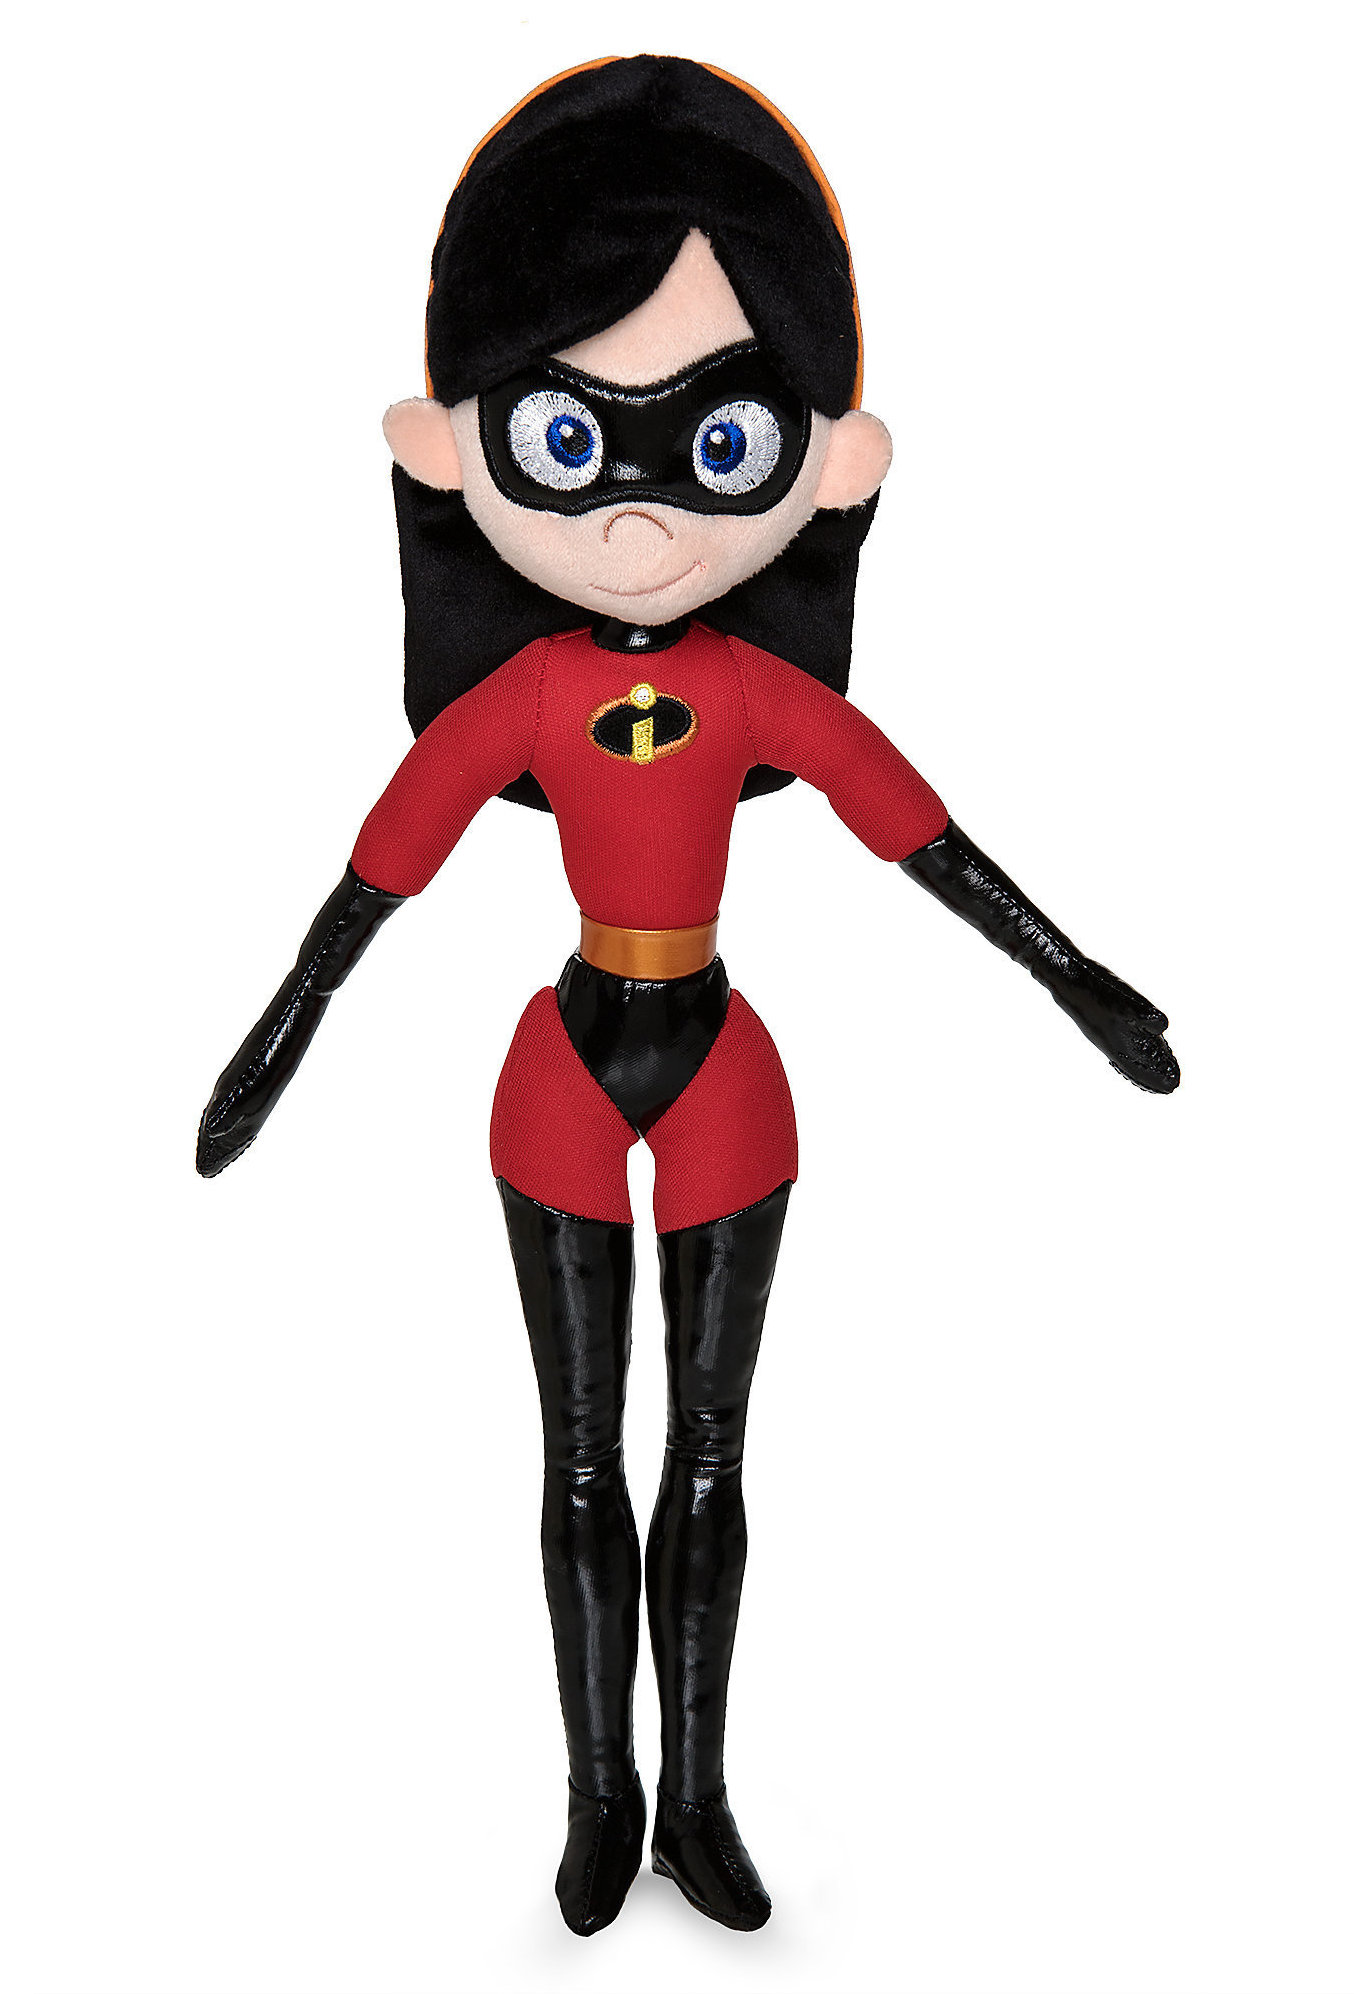 The incredibles 2 plush toys dolls Disney Store The Incredibles 2 Violet Di...